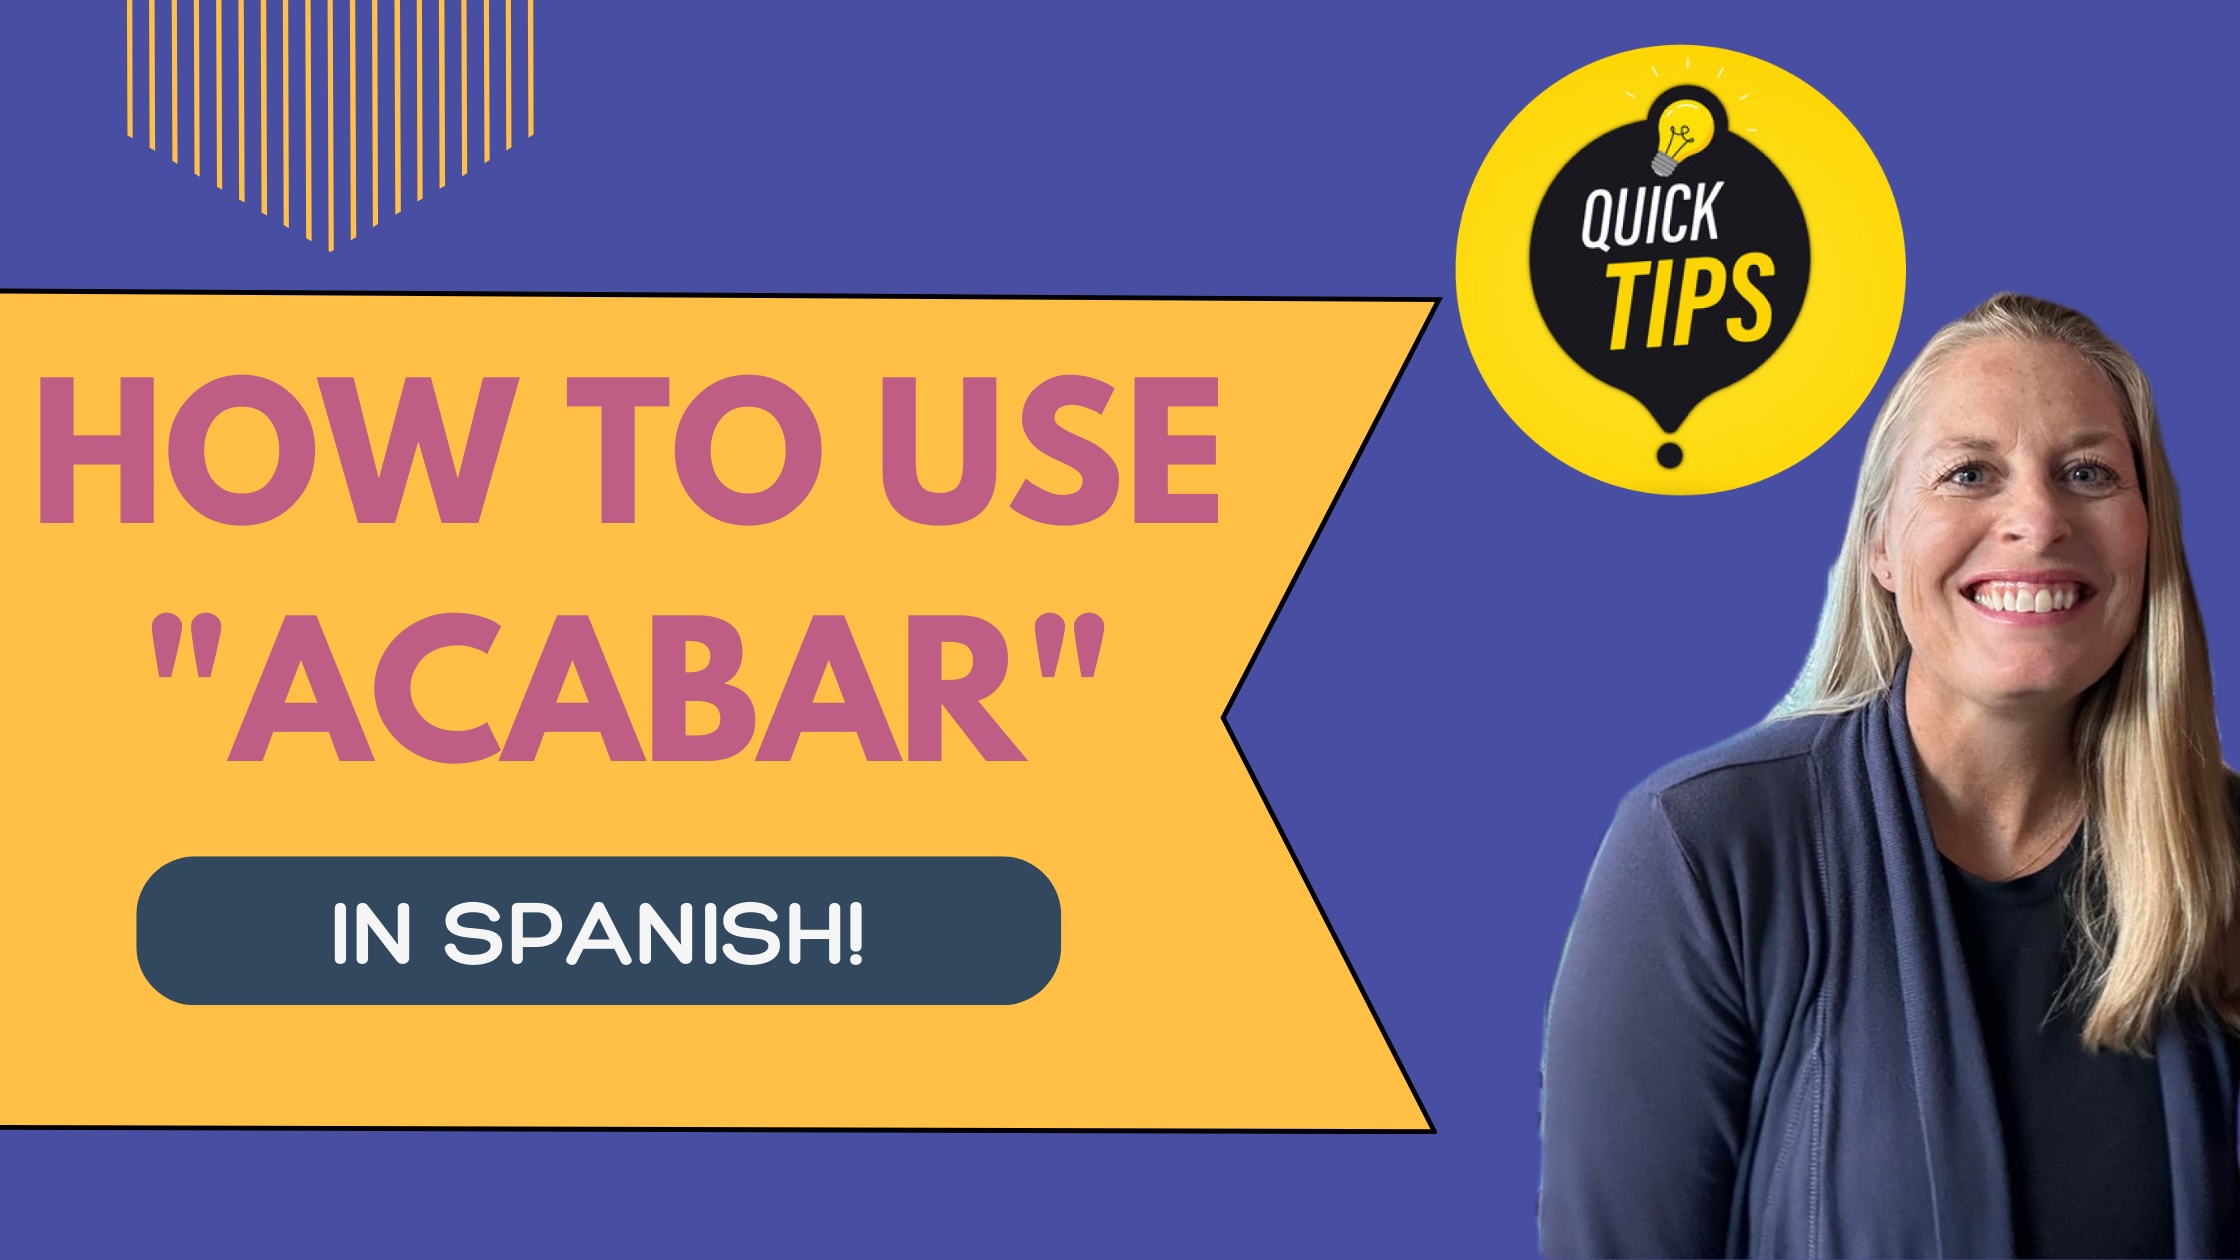 It’s over, finished, ruined or I just did that! Acabar is the Spanish verb you need!